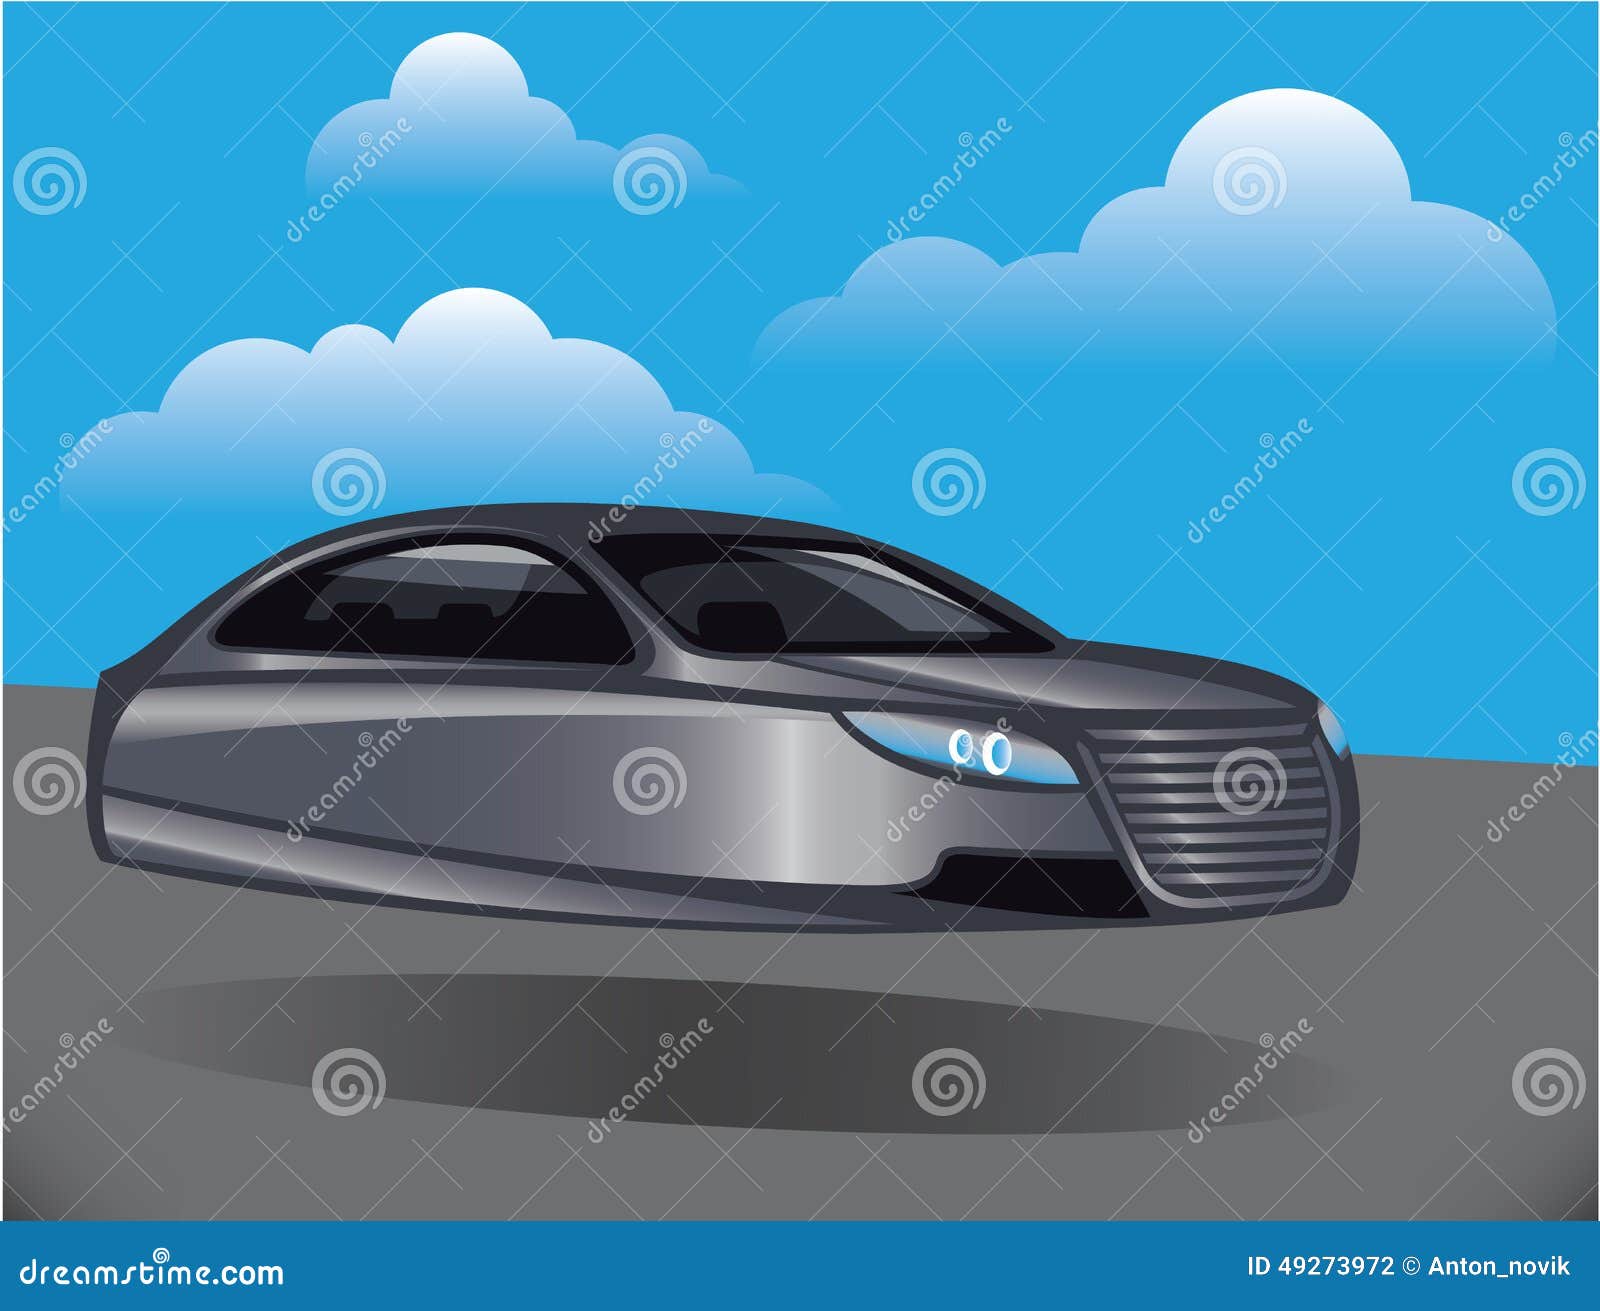 hover car 